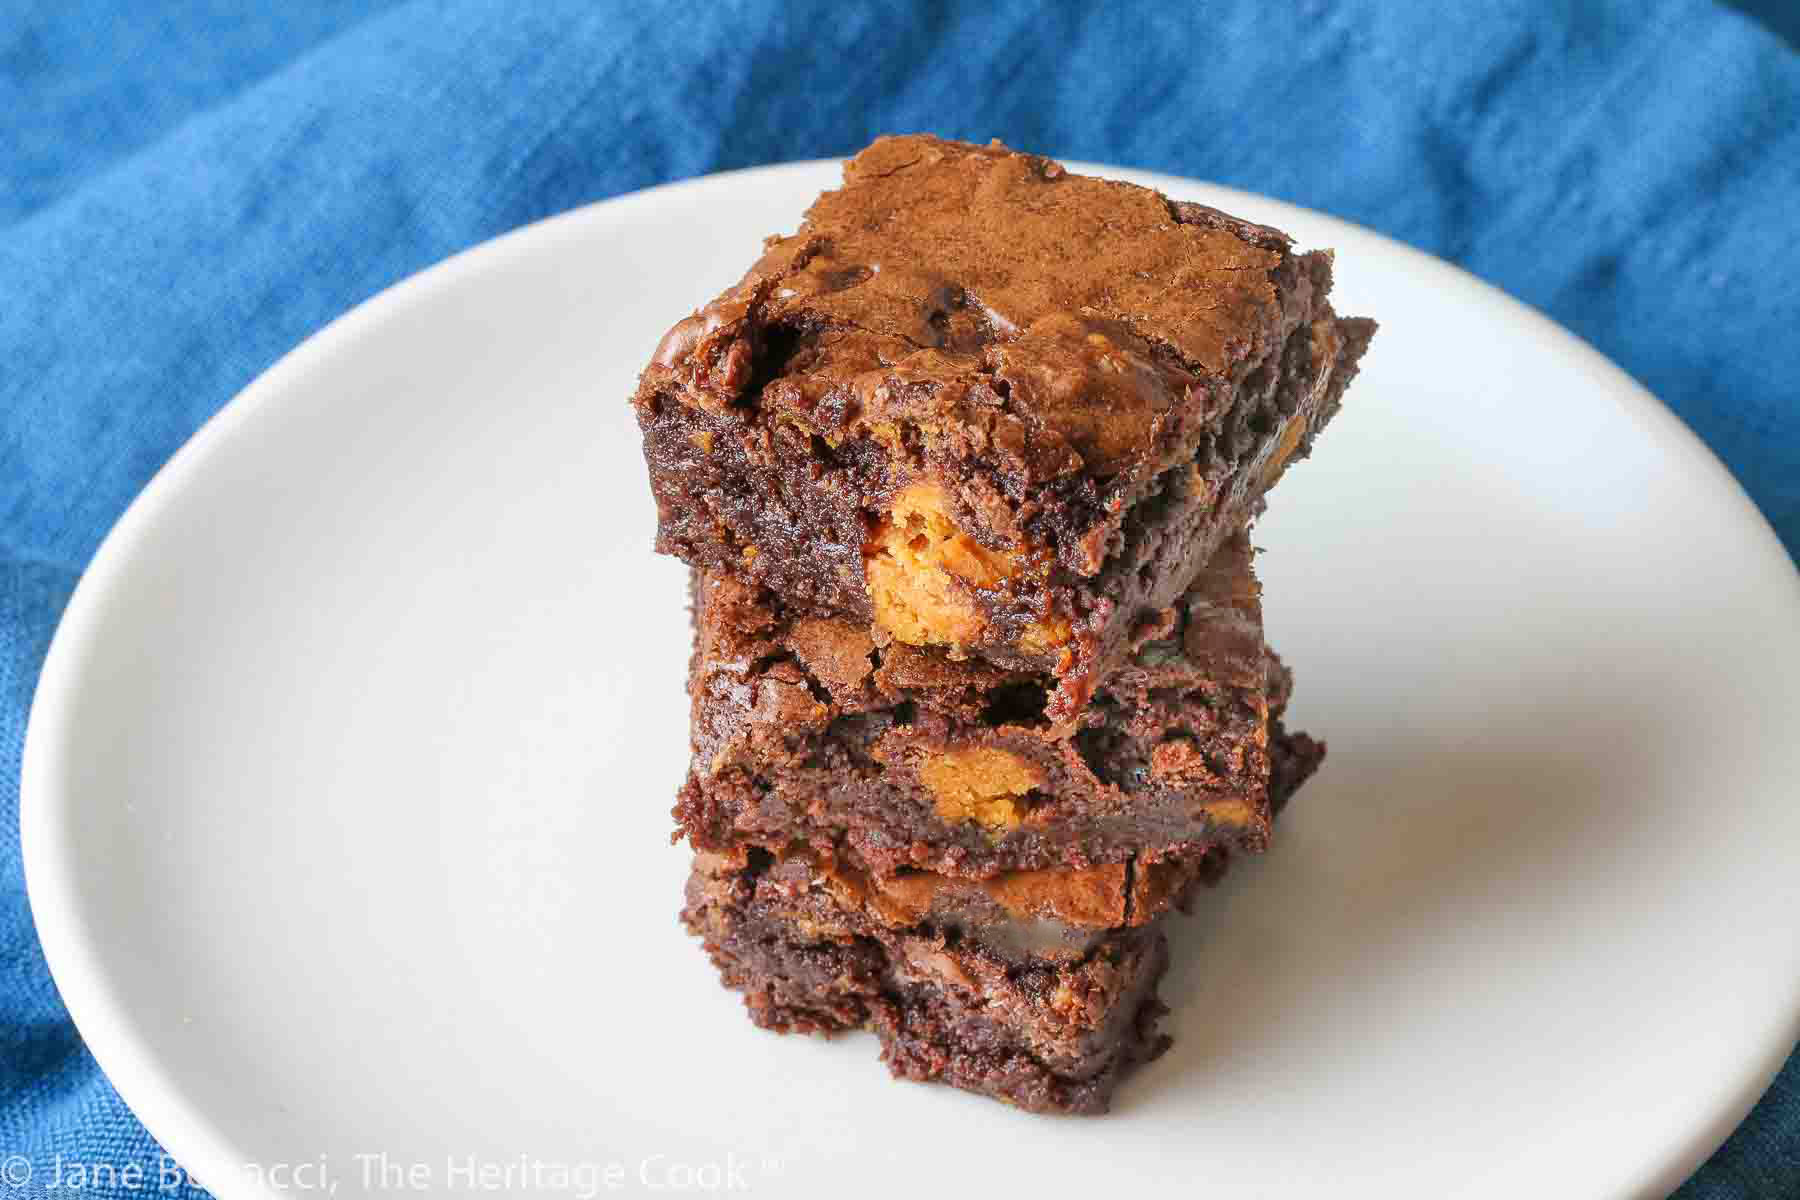 Butterfinger Brownies stacked on white plate with teal napkin background, one with a hand reaching for a brownie off the stack © 2023 Jane Bonacci, The Heritage Cook.